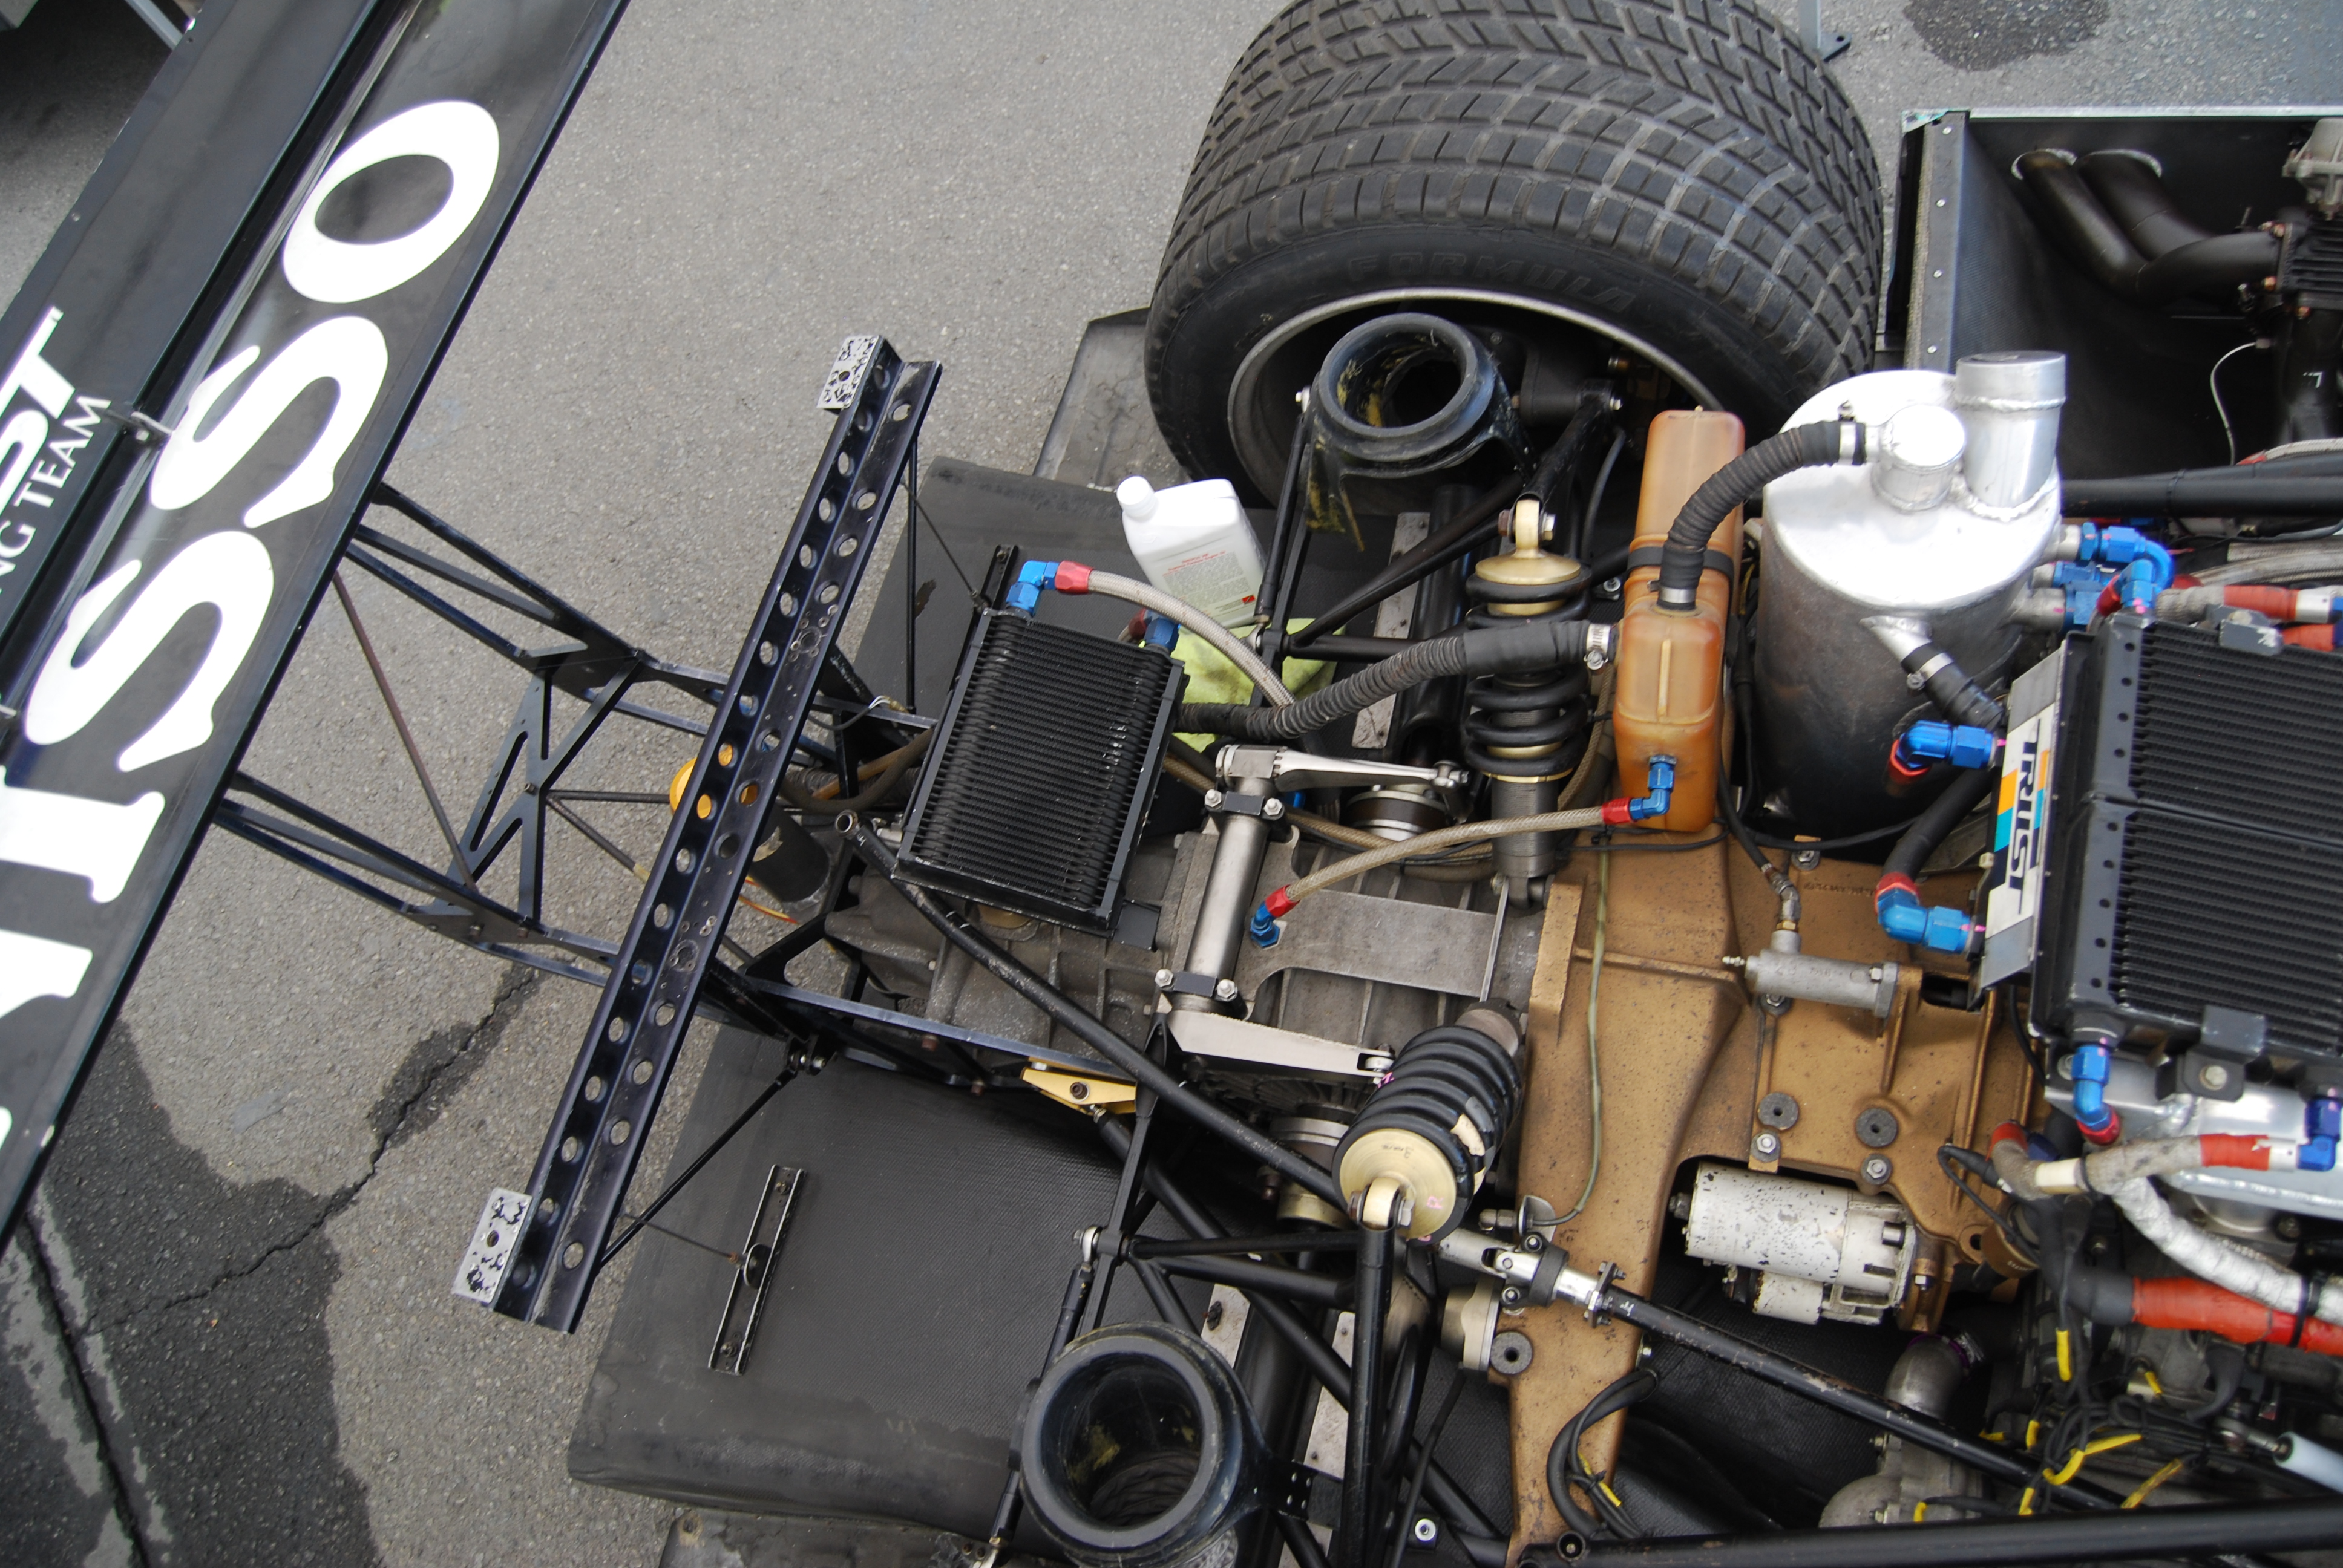 Flickr - wbaiv - Porsche 956-962 engine to wing. All the fiddly bits